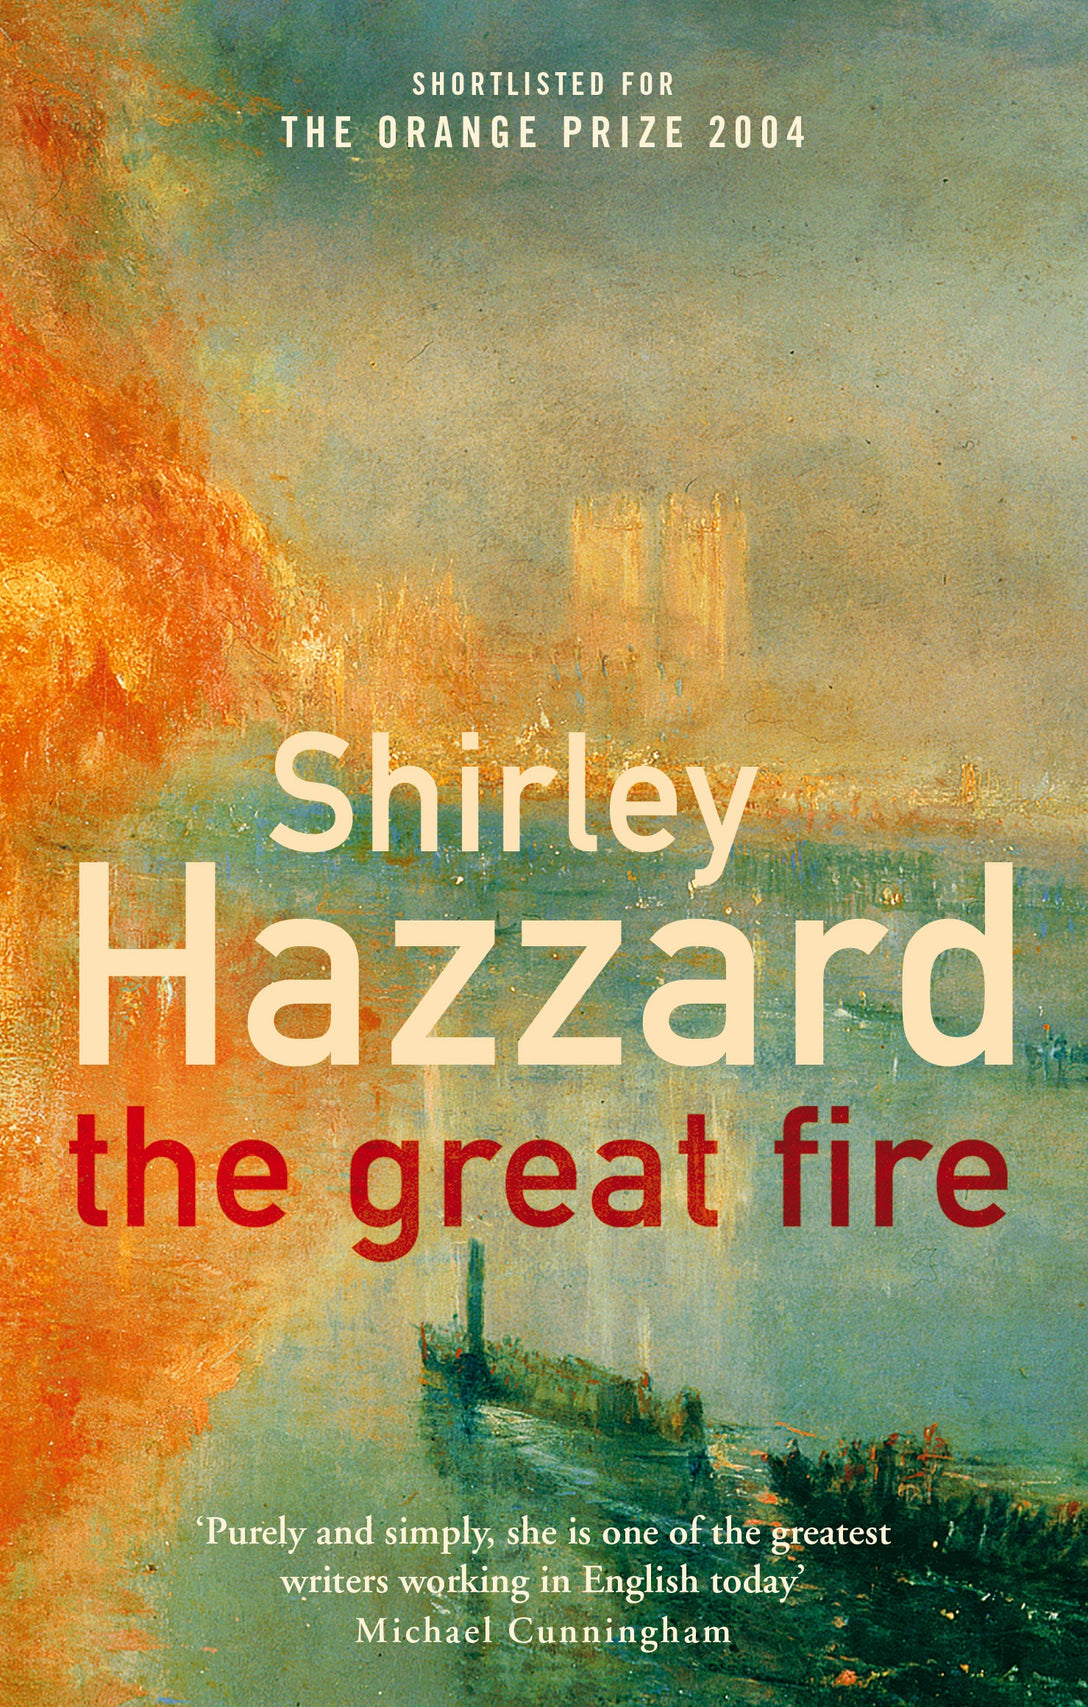 The Great Fire by Shirley Hazzard